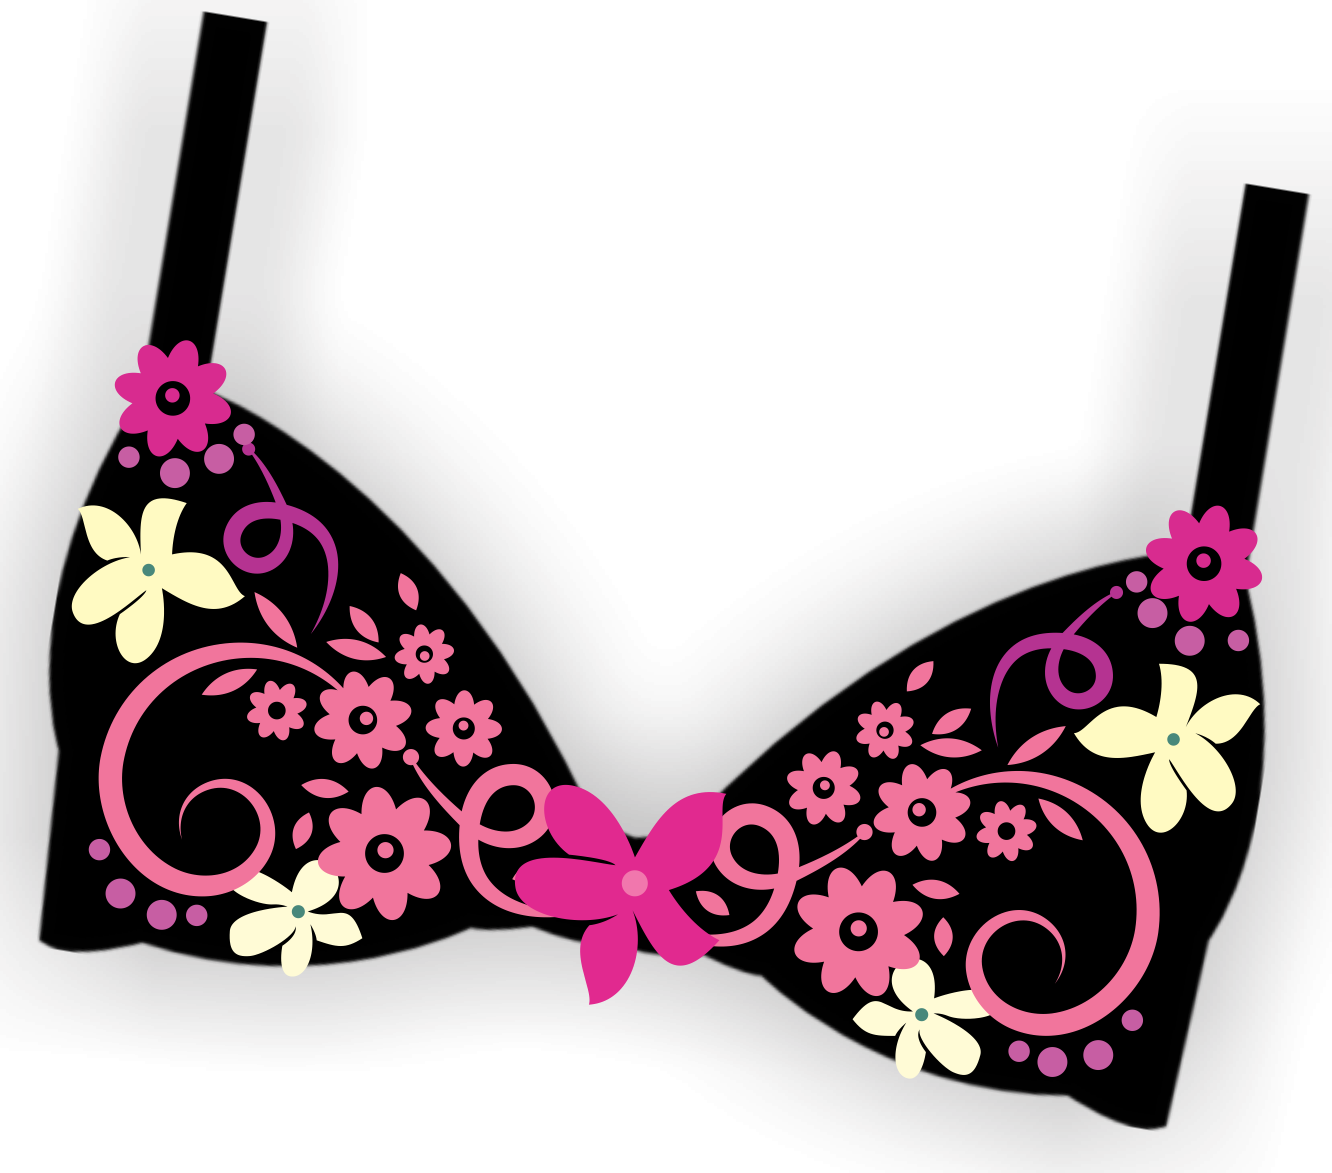 Bling The Bra Is A Fundraising Contest That Promotes - Clip Art Bra For Bre...